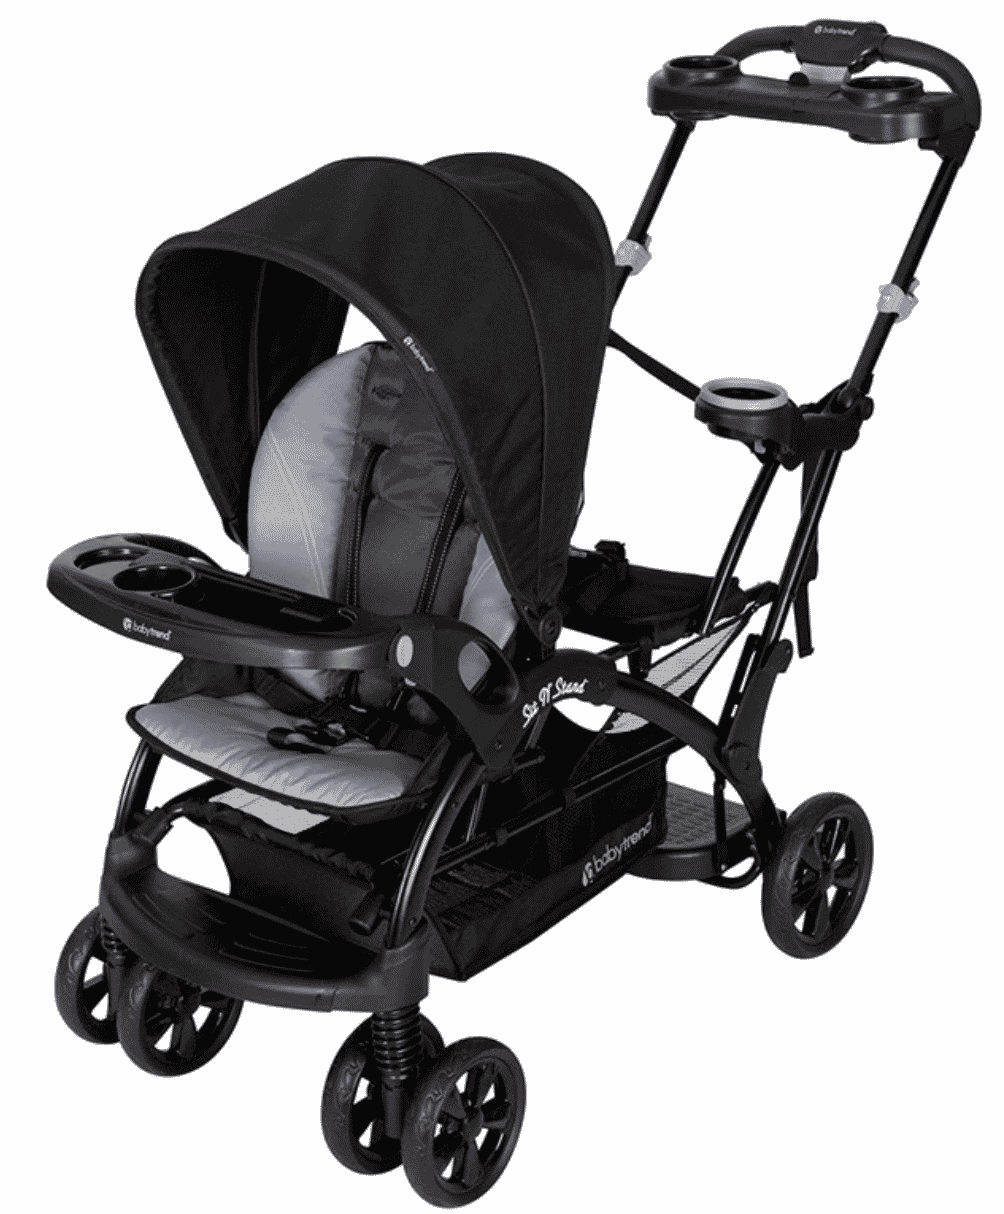 The Best Sit and Stand Strollers of 2020